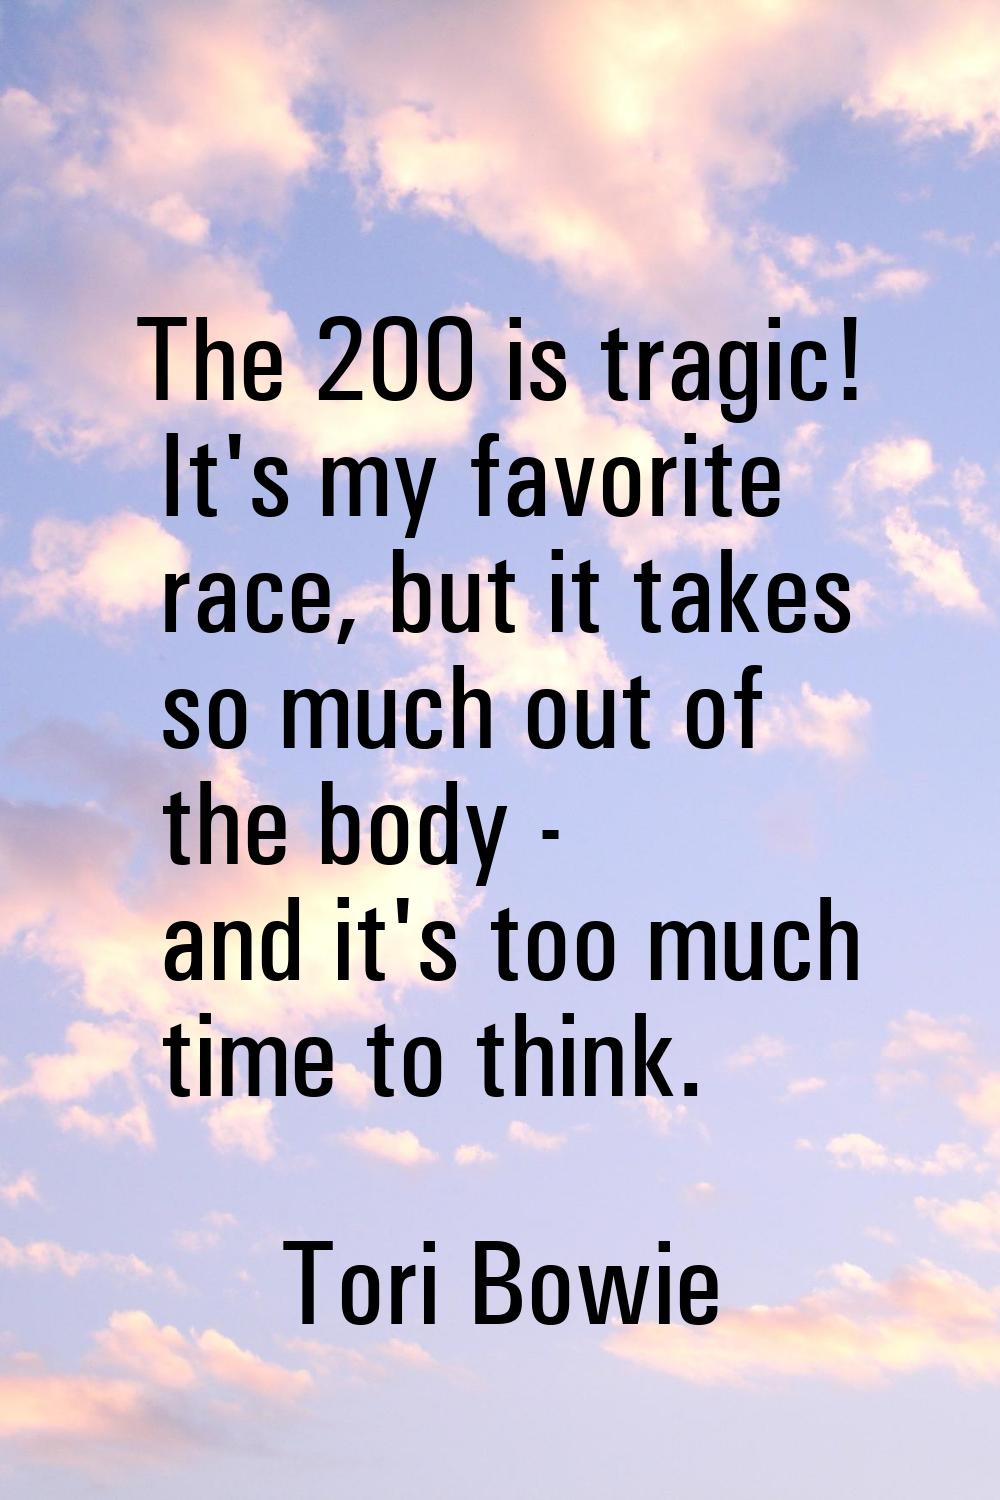 The 200 is tragic! It's my favorite race, but it takes so much out of the body - and it's too much 